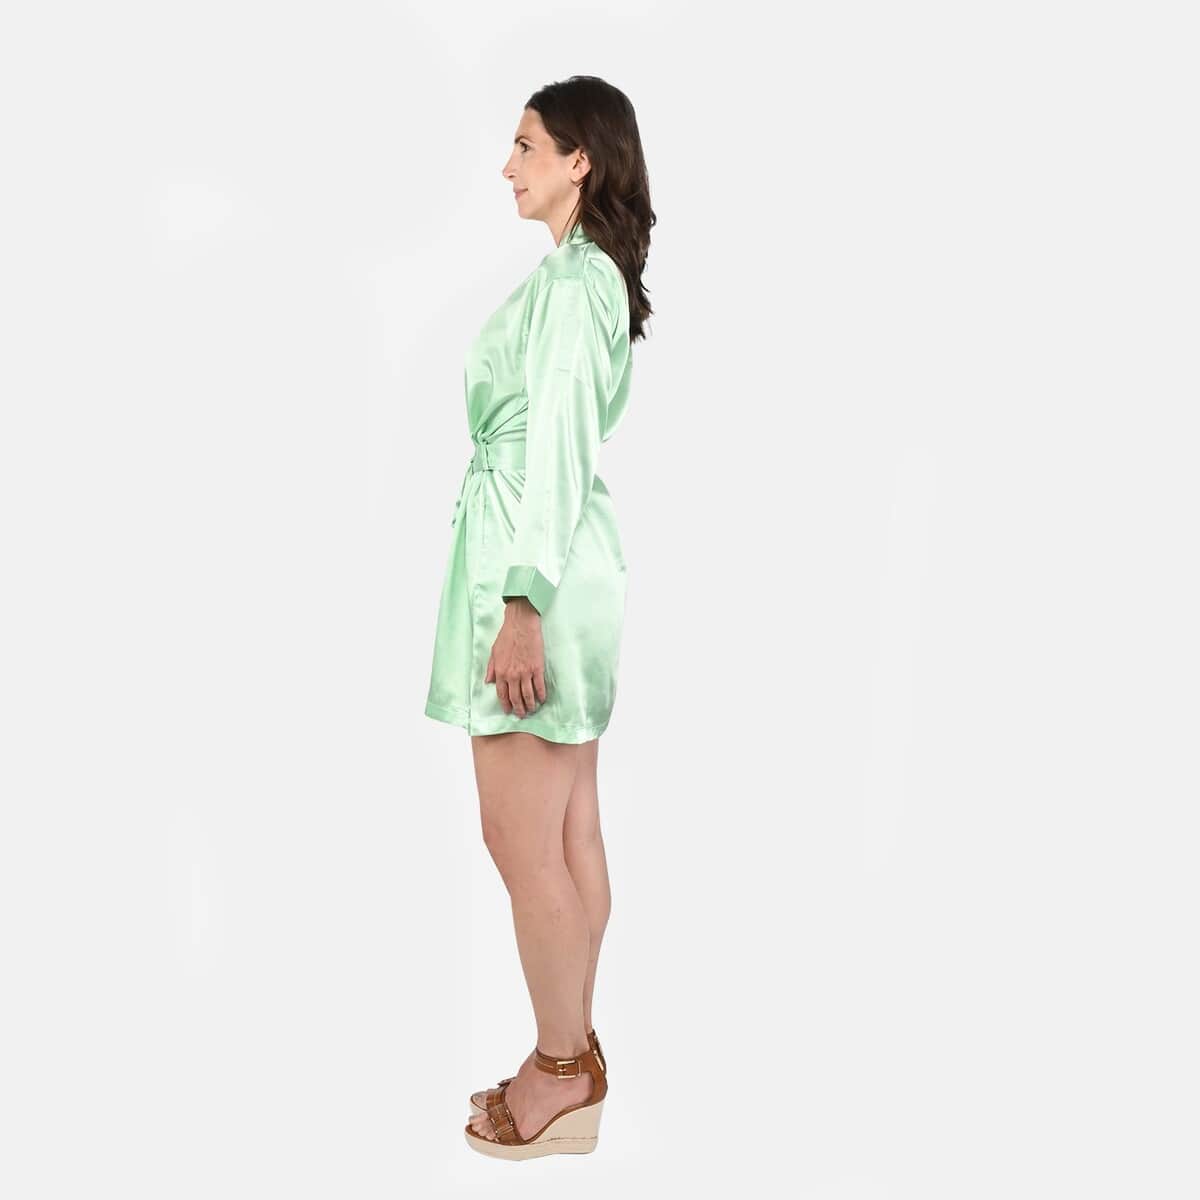 UP 2Date Fashion Green Satin Robe - S image number 2